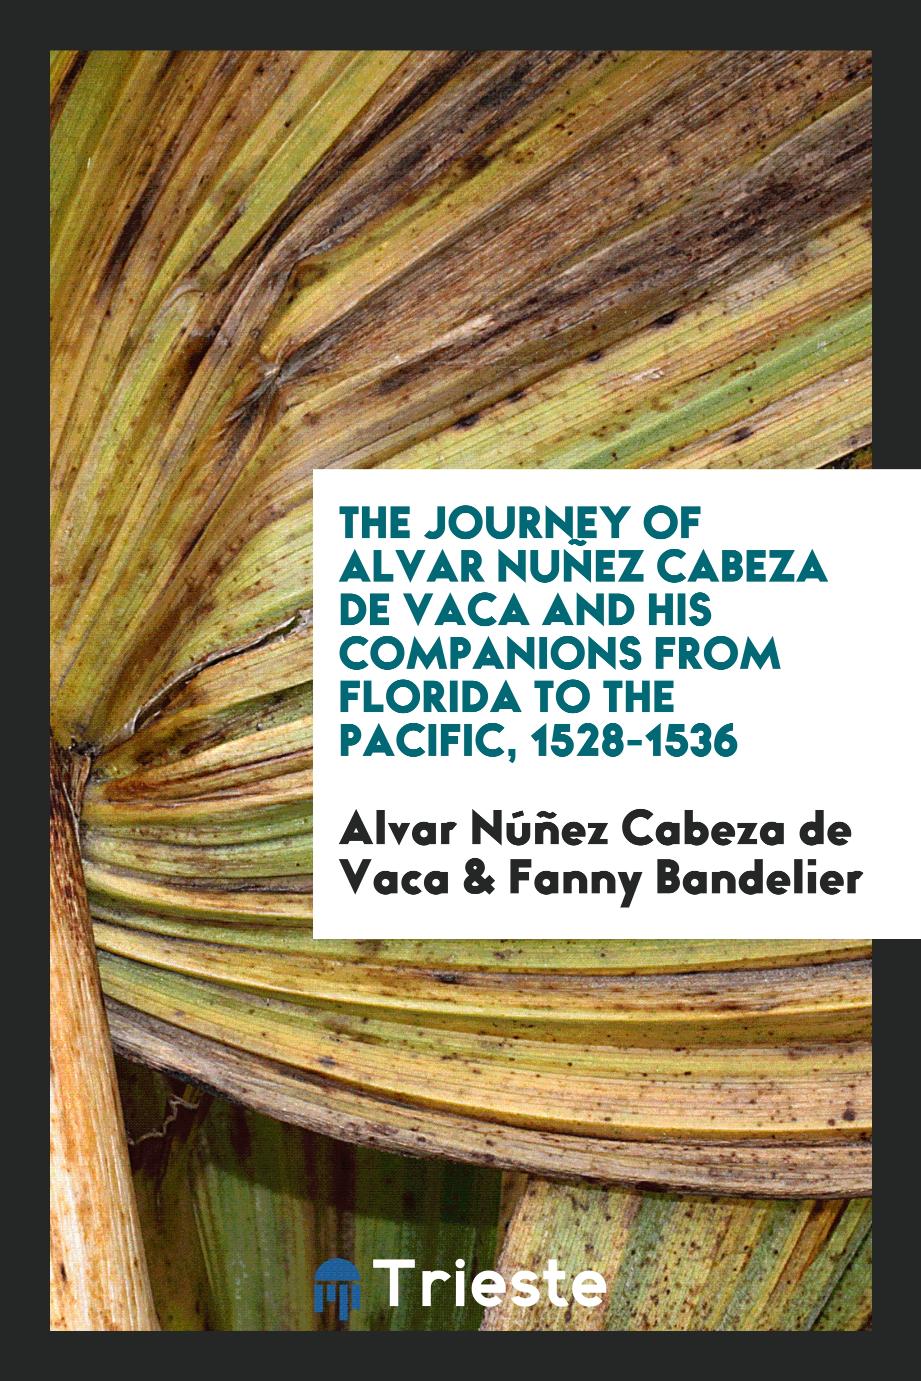 The Journey of Alvar Nuñez Cabeza de Vaca and His Companions from Florida to the Pacific, 1528-1536